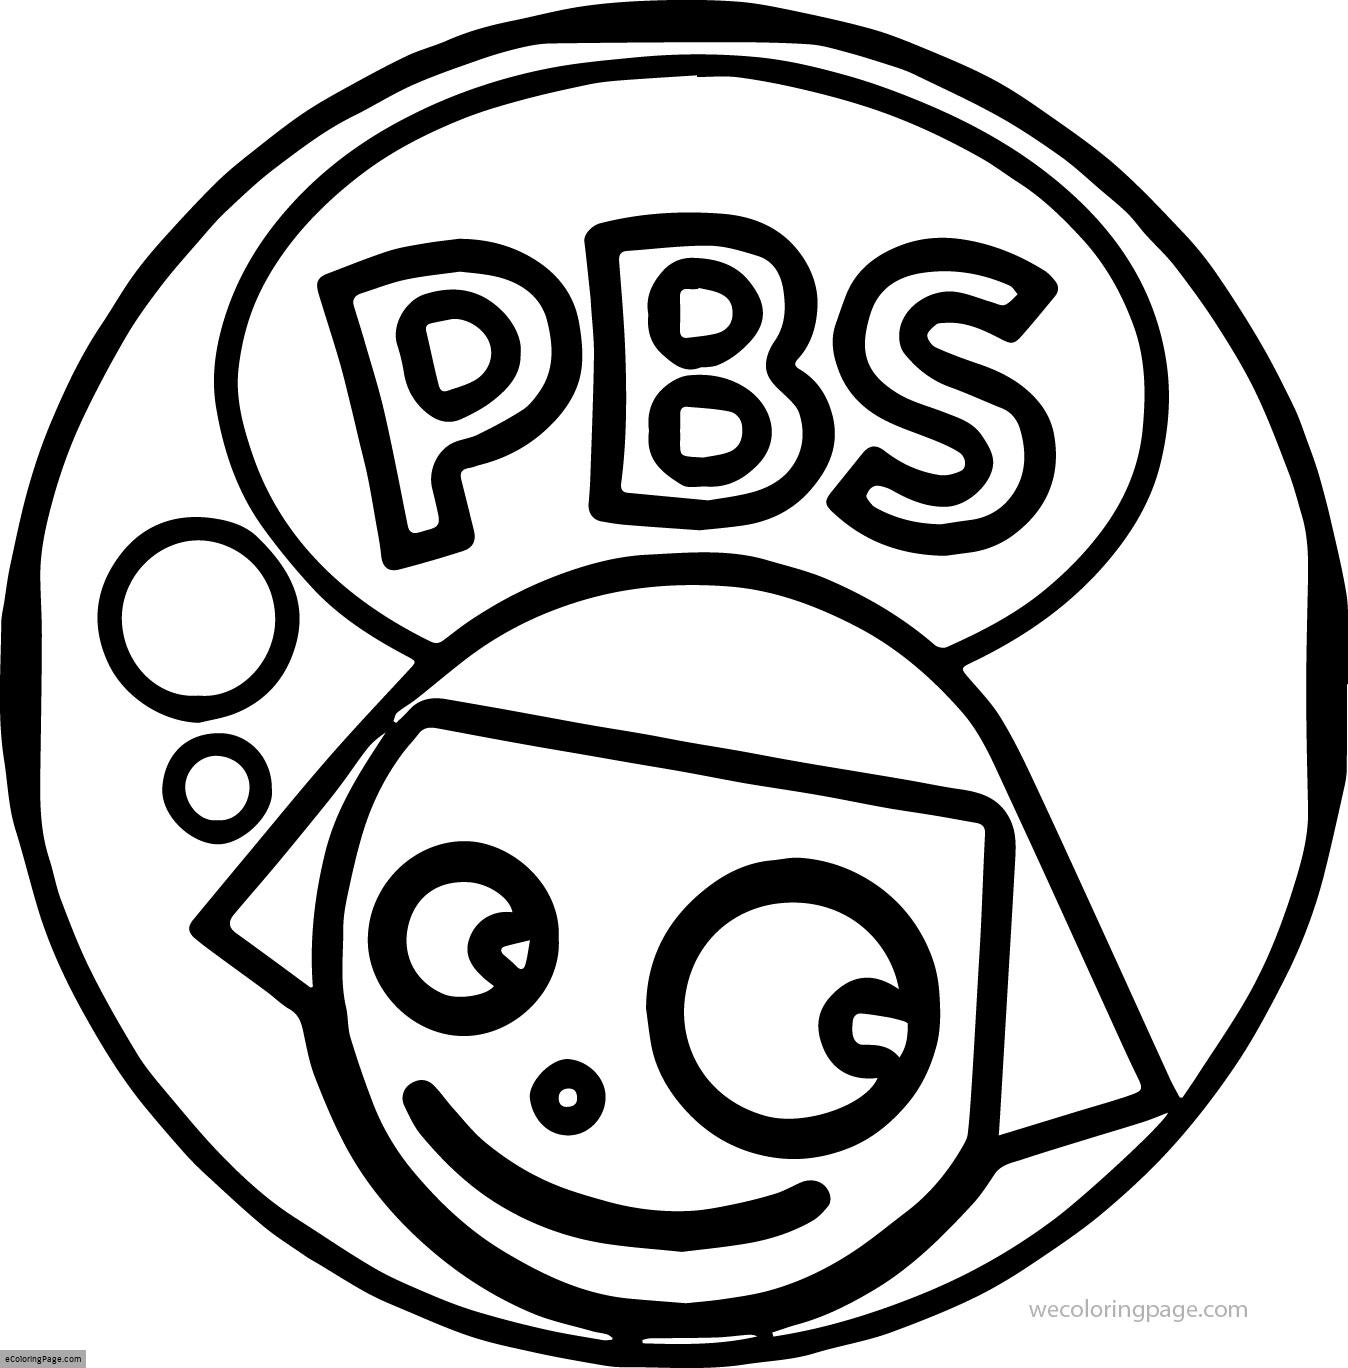 Pbs Kids Coloring Pages at GetColorings com Free printable colorings